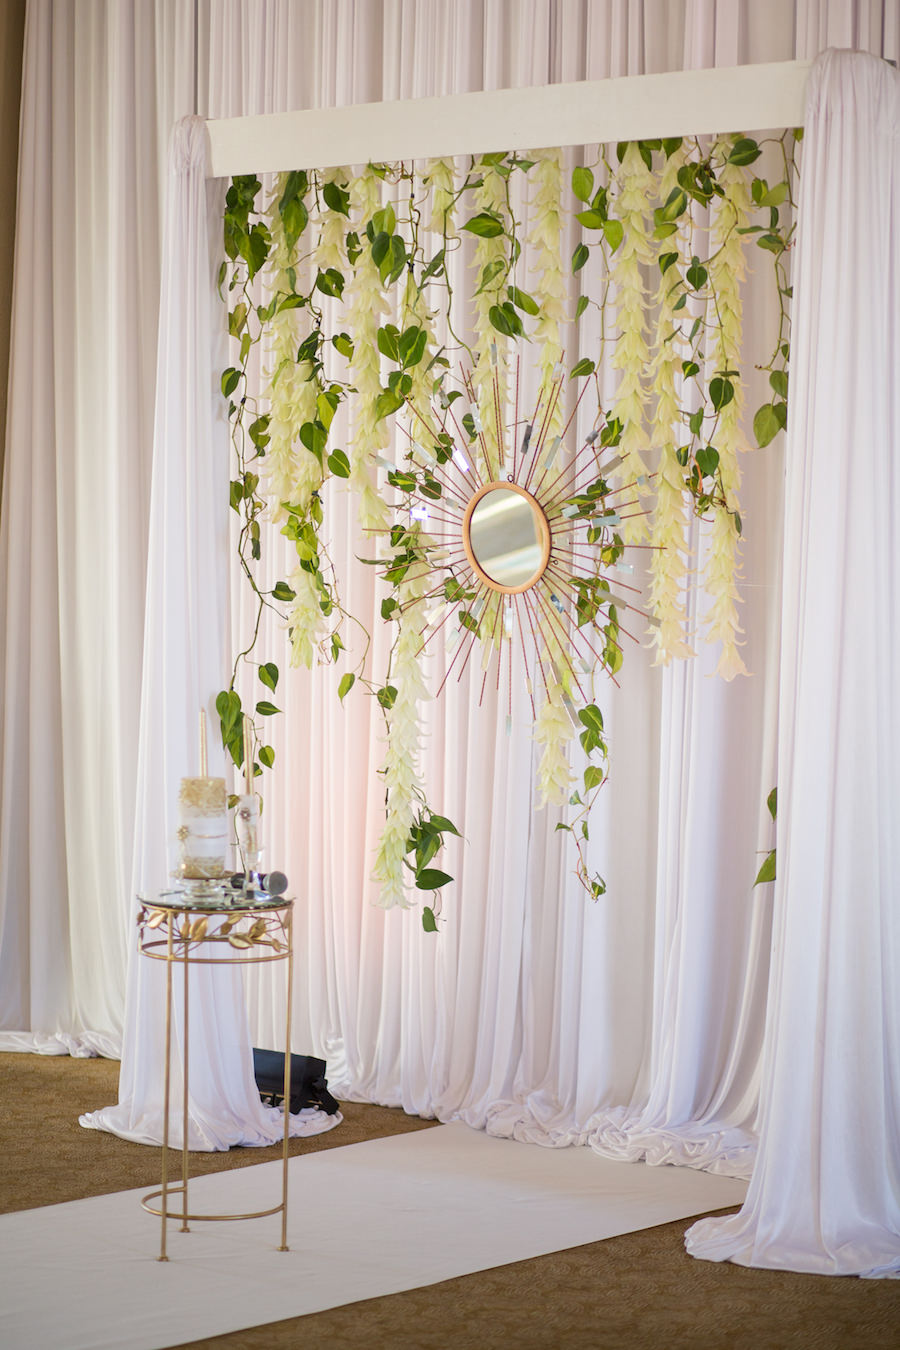 Elegant Wedding Ceremony Decor Altar White Draped Backdrop with Hanging Flowers, Greenery and Gold Mirror | Tampa Bay Wedding Photographer Brandi Image Photography | Planner Parties a la Carte